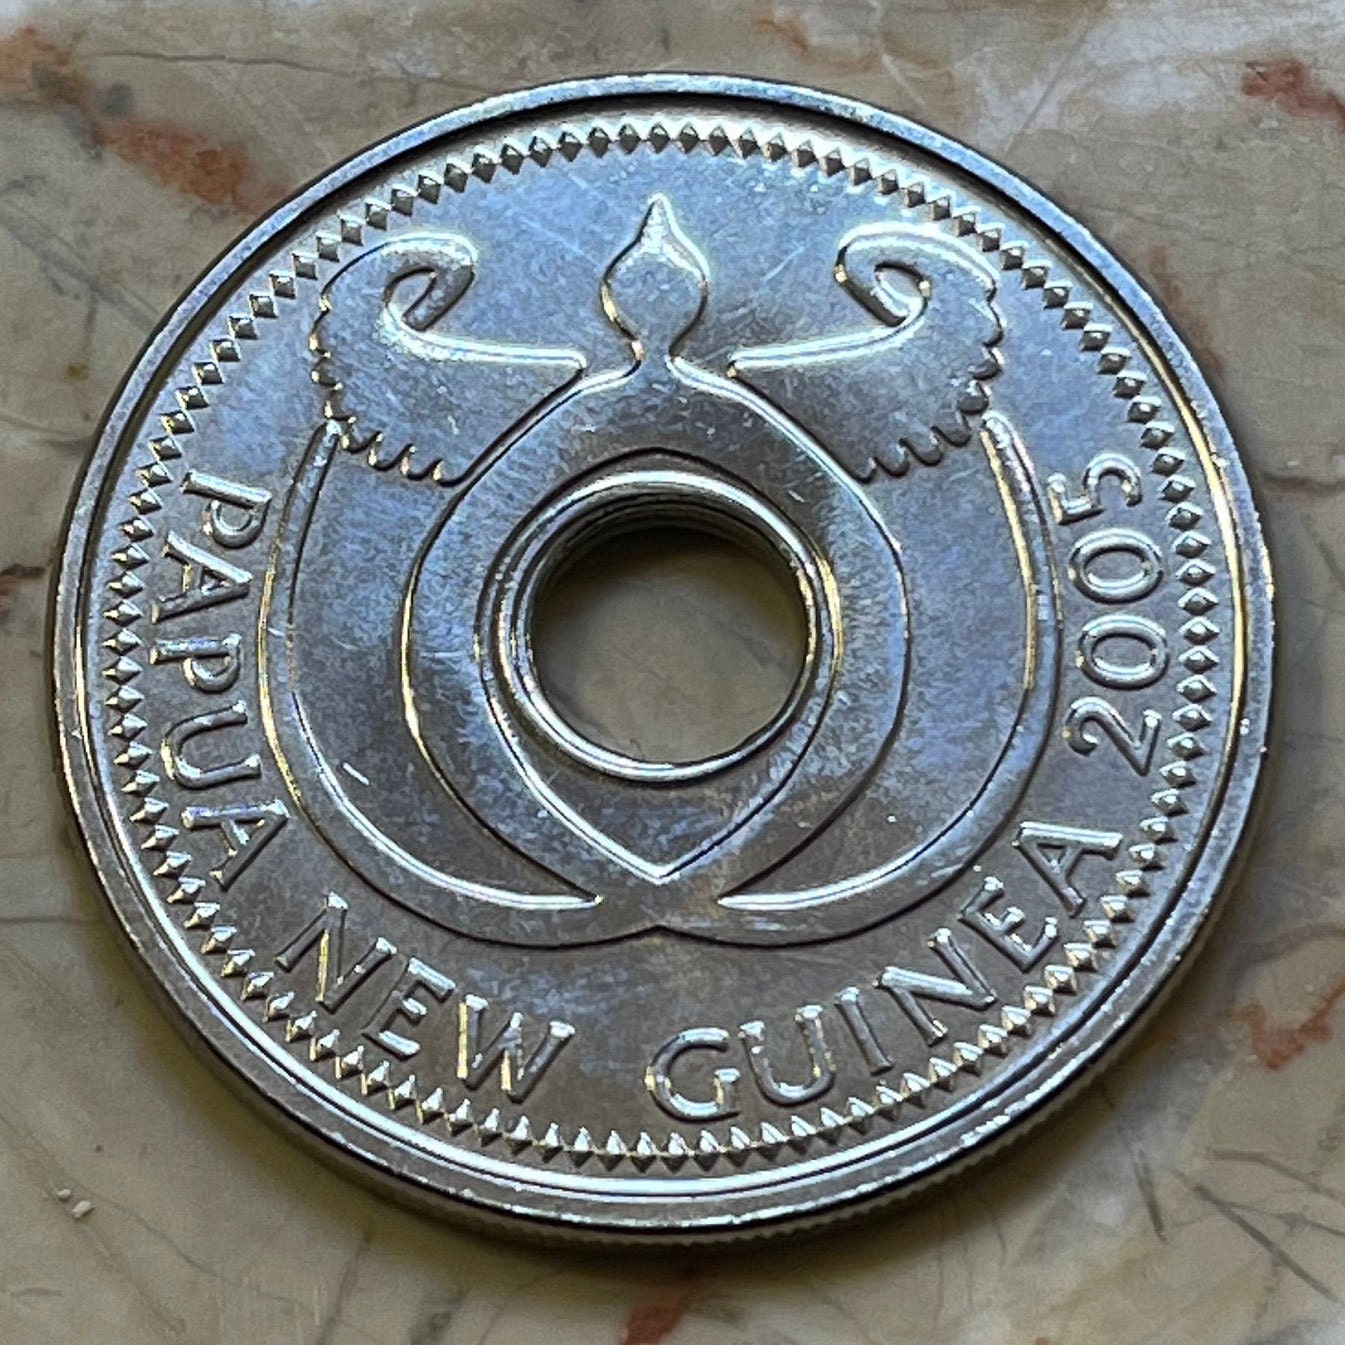 New Guinea Crocodiles 1 Kina Papua New Guinea Authentic Coin Money for Jewelry and Craft Making